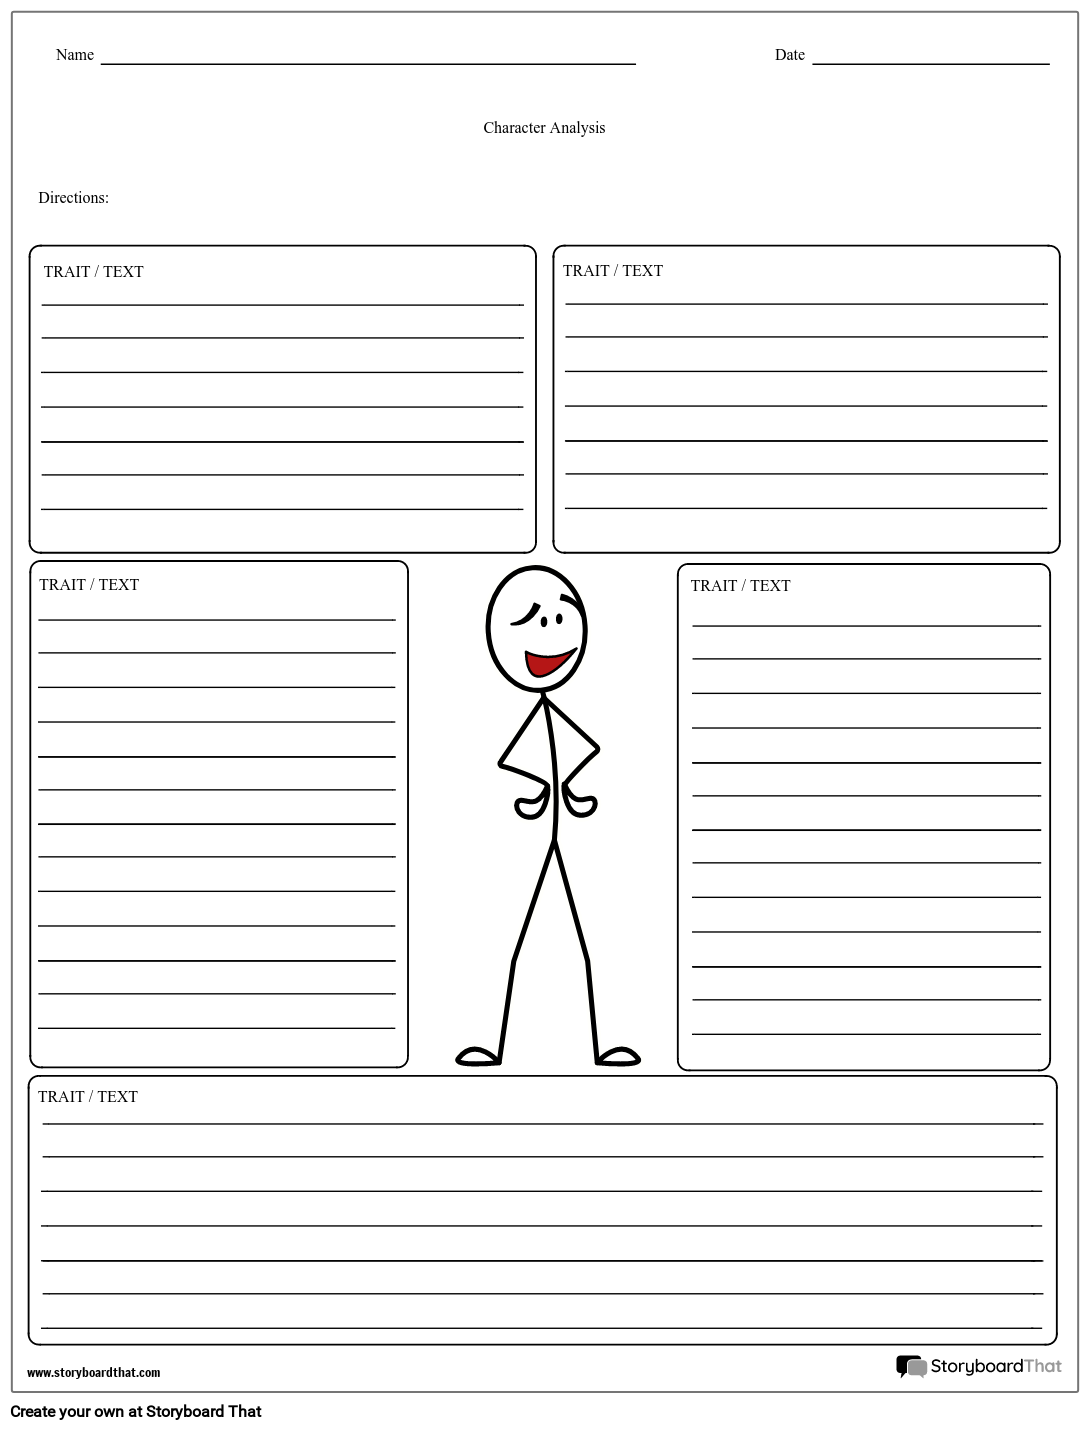 Create a Character Analysis Worksheet Character Analysis Template